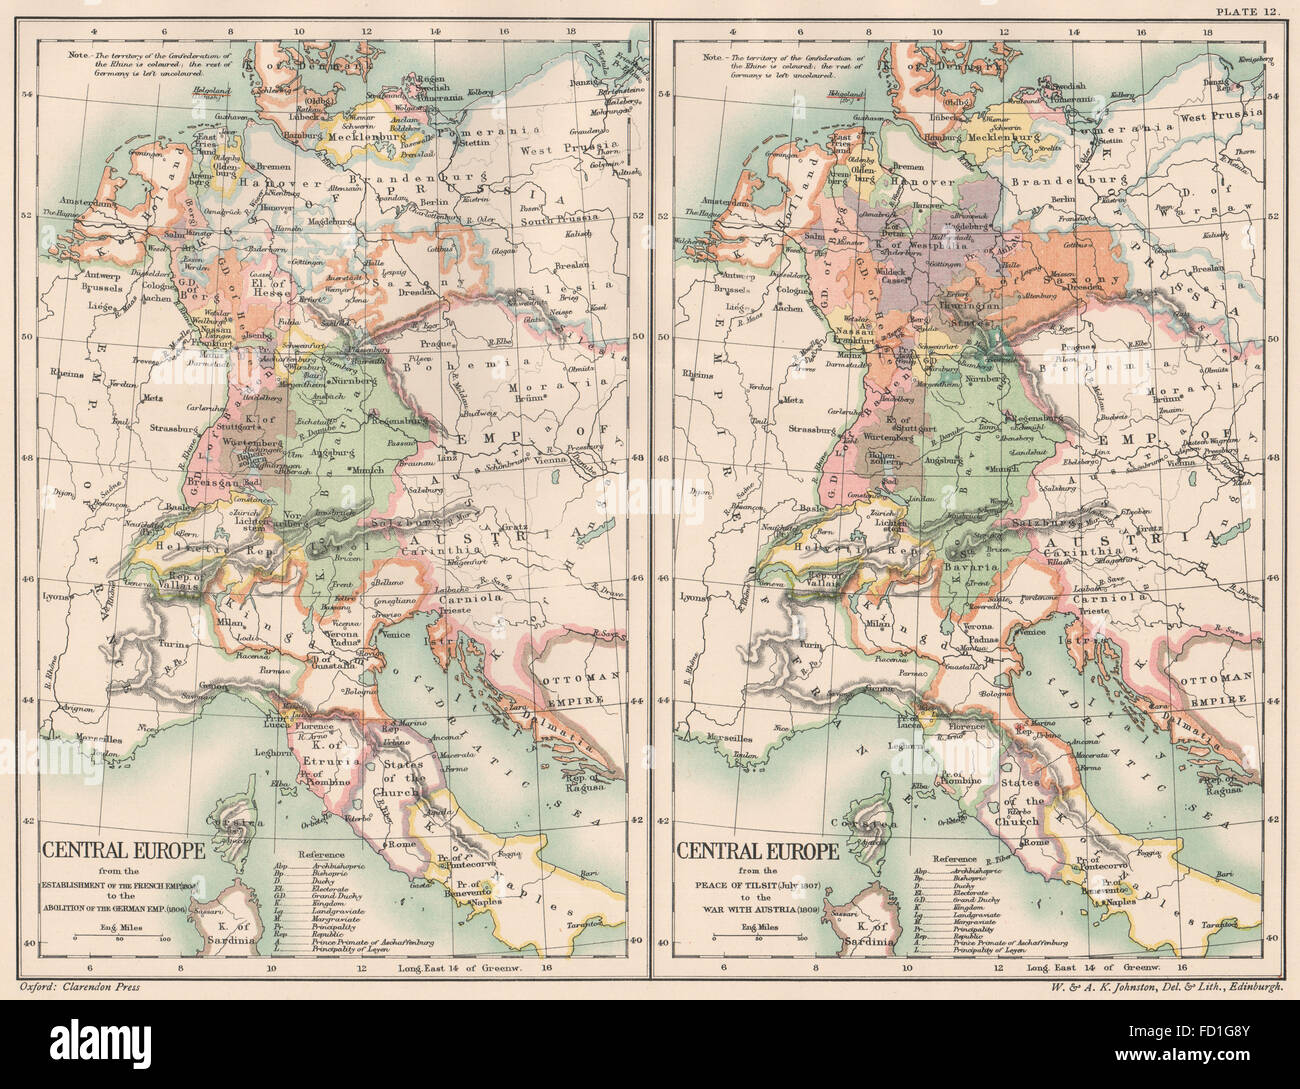 Central Europe 1804 1806 1807 1809 French Empire Peace Of Sovetsk 1902 Map Stock Photo Alamy